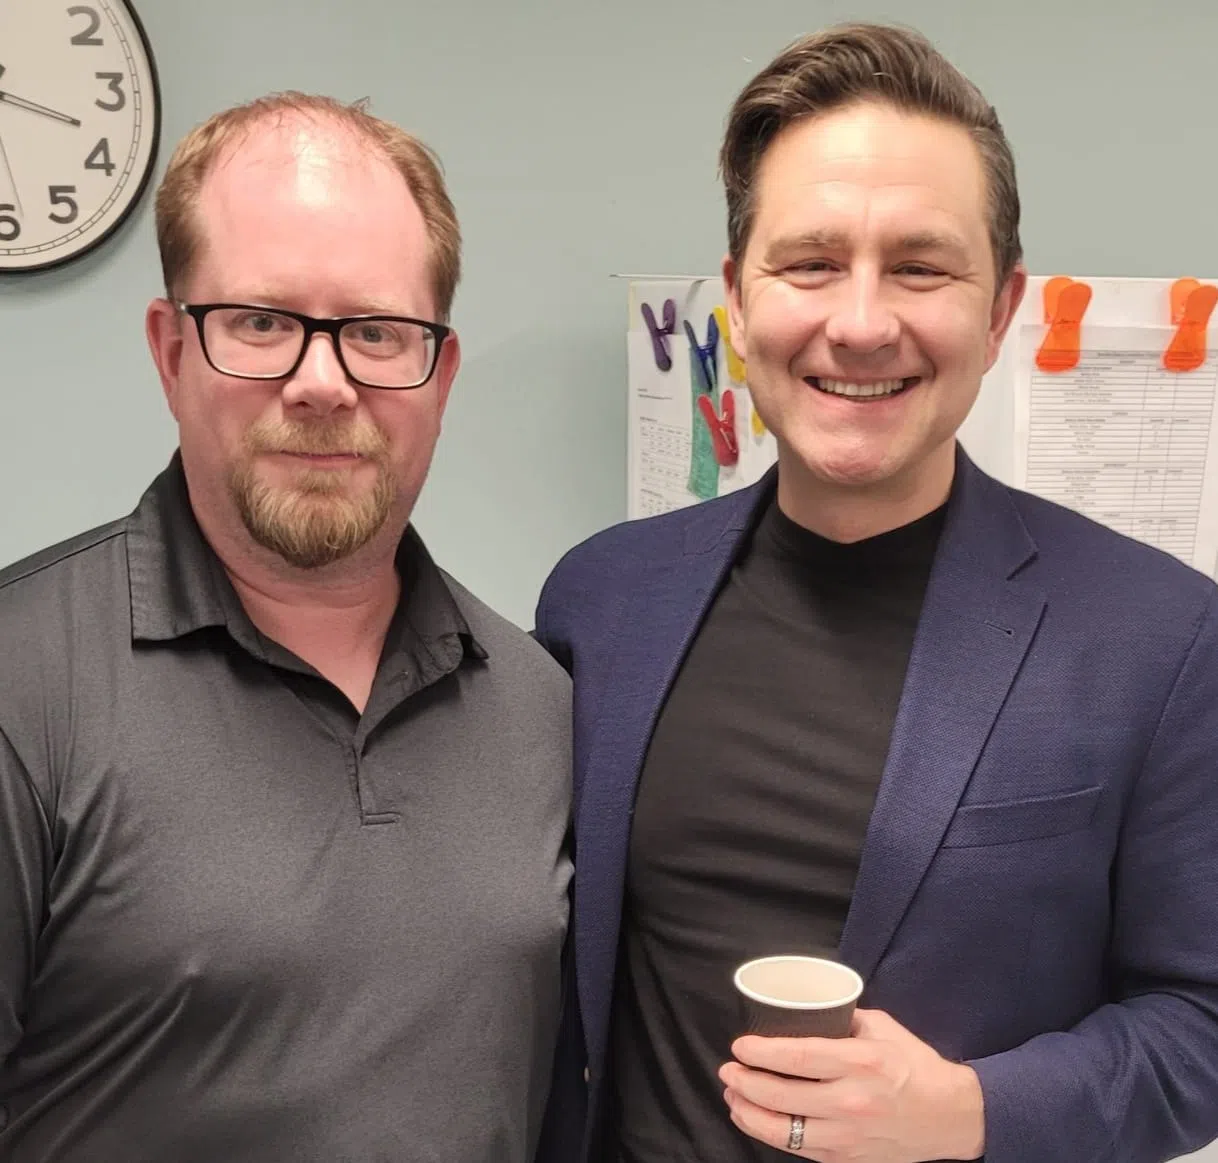 Scottie O chatted with Pierre Poilievre while he was in Port Hawkesbury